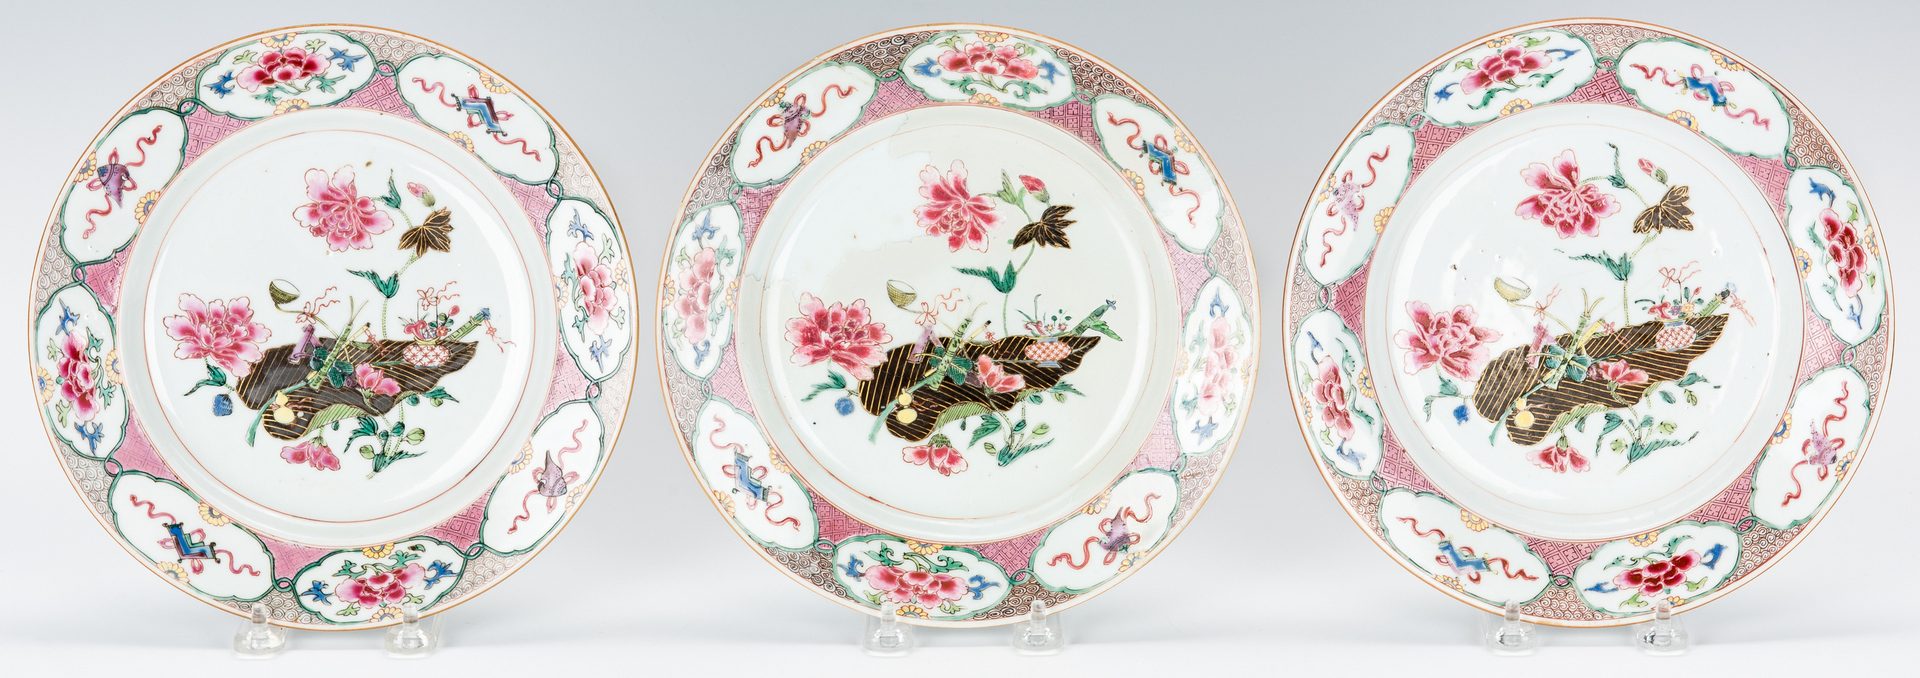 Lot 23: 5 Chinese Export Famille Rose Porcelain Pieces